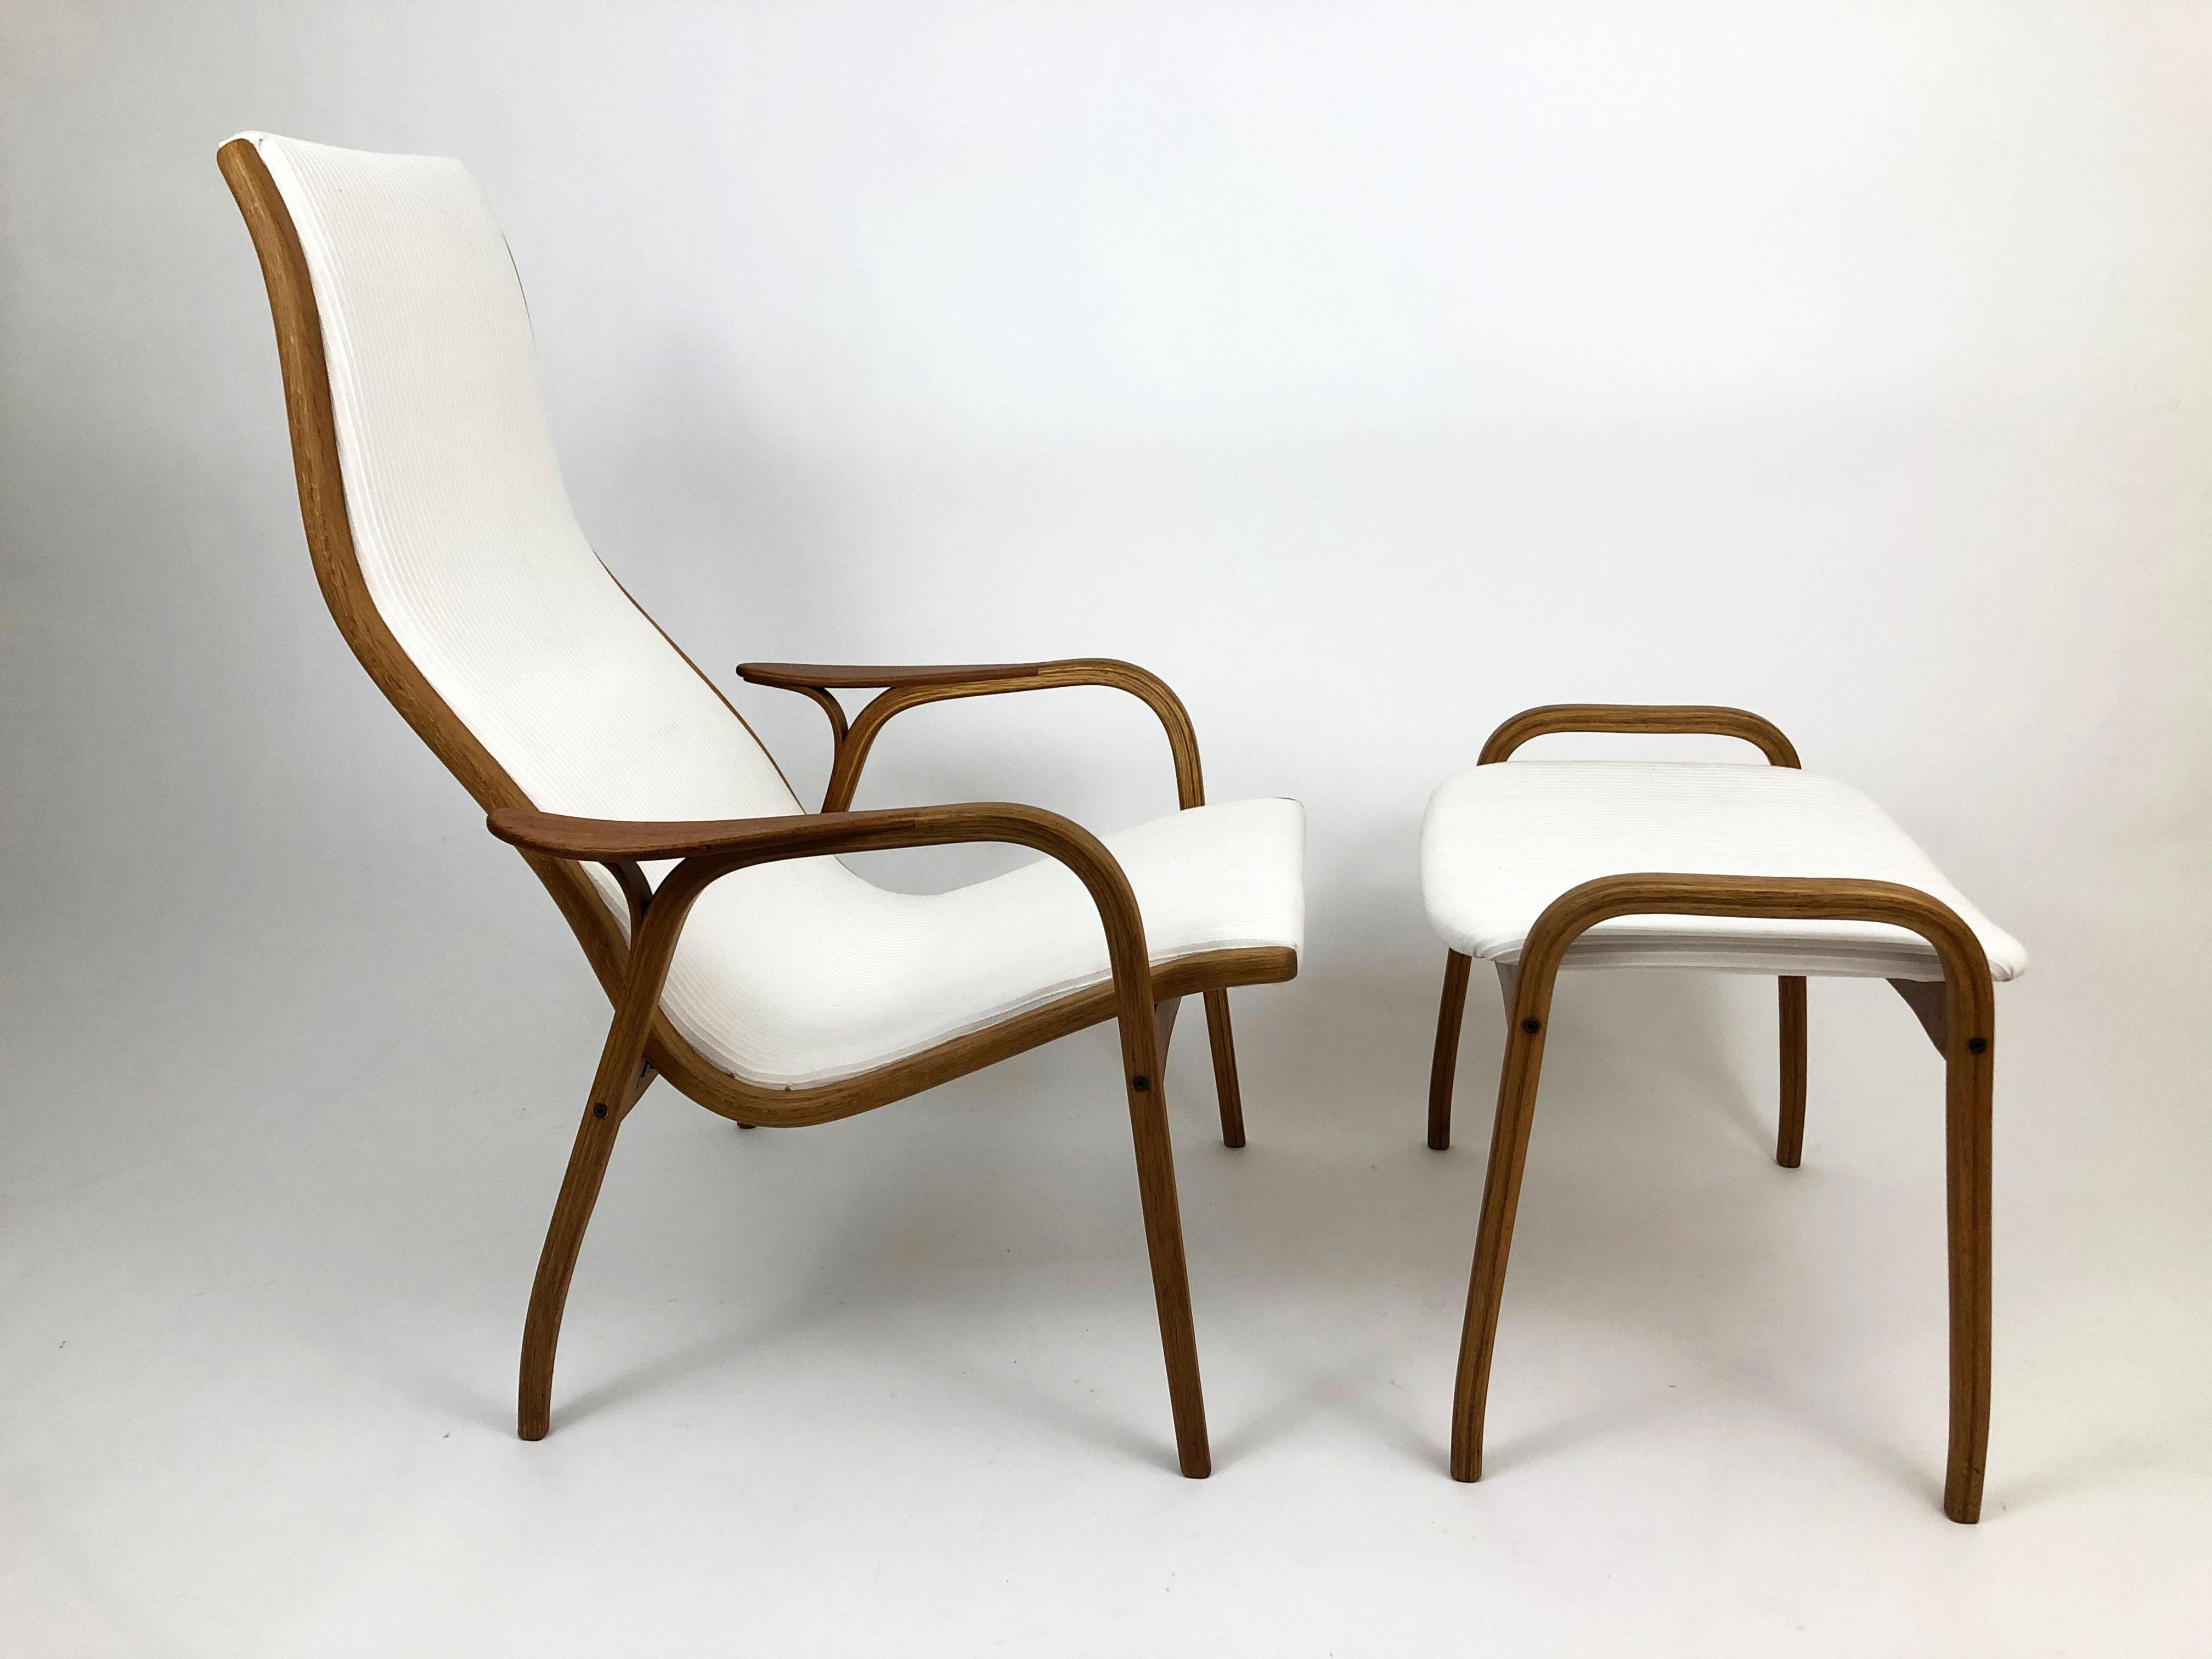 A 'Lamino' lounge chair and ottoman by Yngve Ekstrom for Swedese Mobler.

Measures: Seat height
16.0 inches 

Ottoman dimensions: 23.5